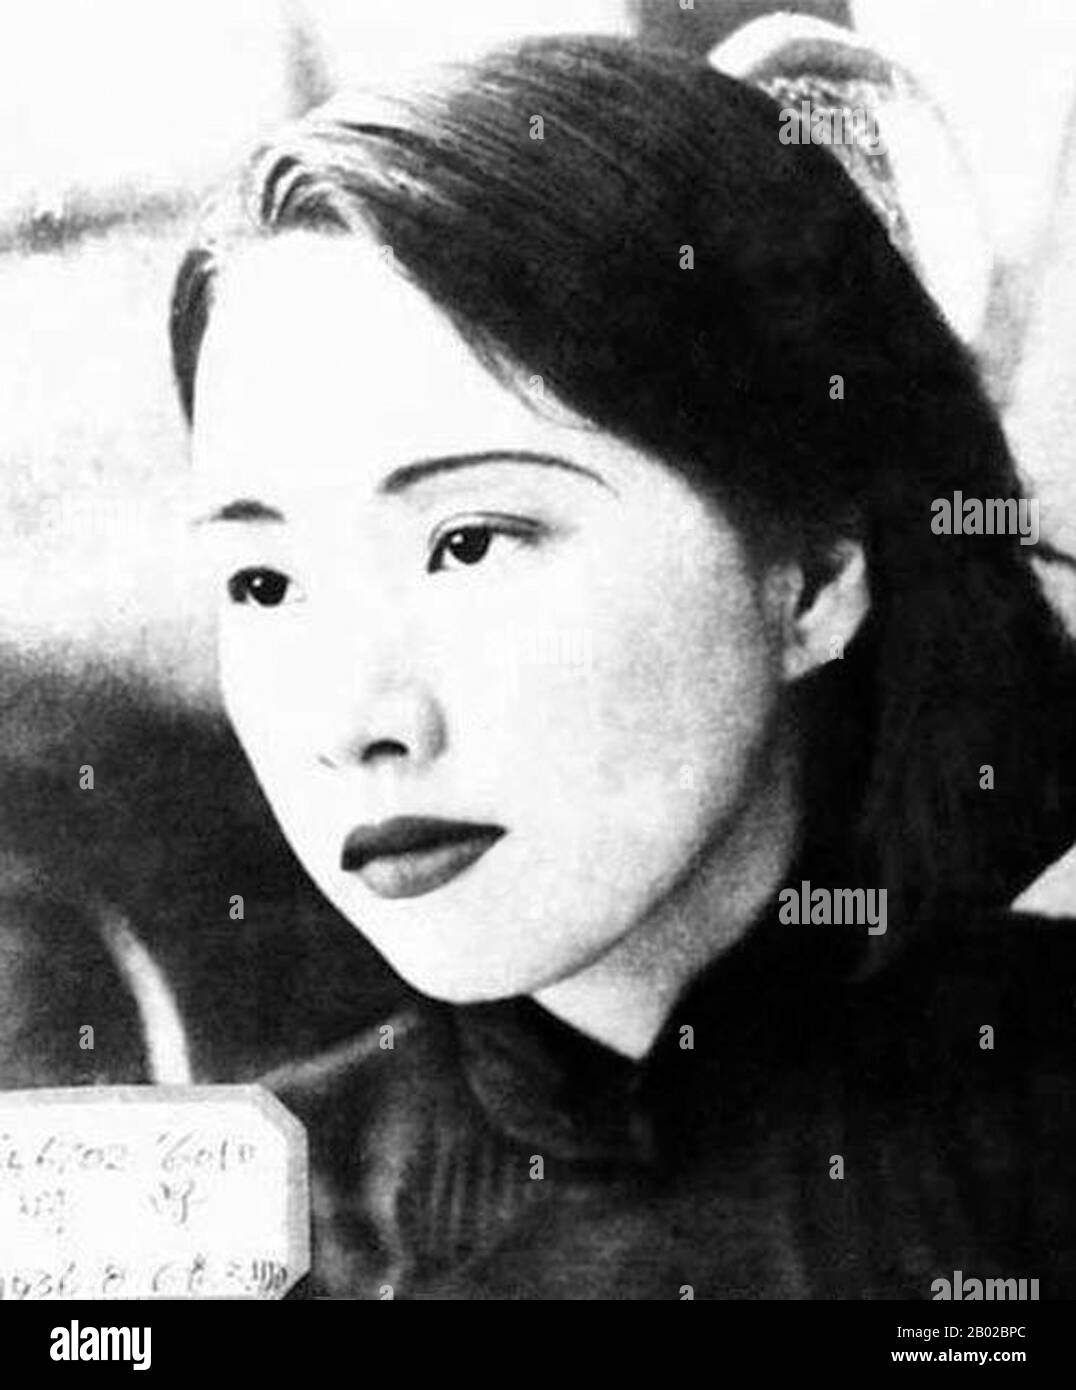 Jiang Qing (Chiang Ch'ing, March 1914 – May 14, 1991) was the pseudonym that was used by Chinese leader Mao Zedong's last wife, a major Communist Party of China power figure.  She went by the stage name Lan Ping during her acting career, and was known by various other names during her life. She married Mao in Yan'an in November 1938, and is sometimes referred to as Madame Mao in Western literature, serving as Communist China's first first lady.   Jiang Qing was most well-known for playing a major role in the Cultural Revolution (1966–76) and for forming the radical political alliance known as Stock Photo